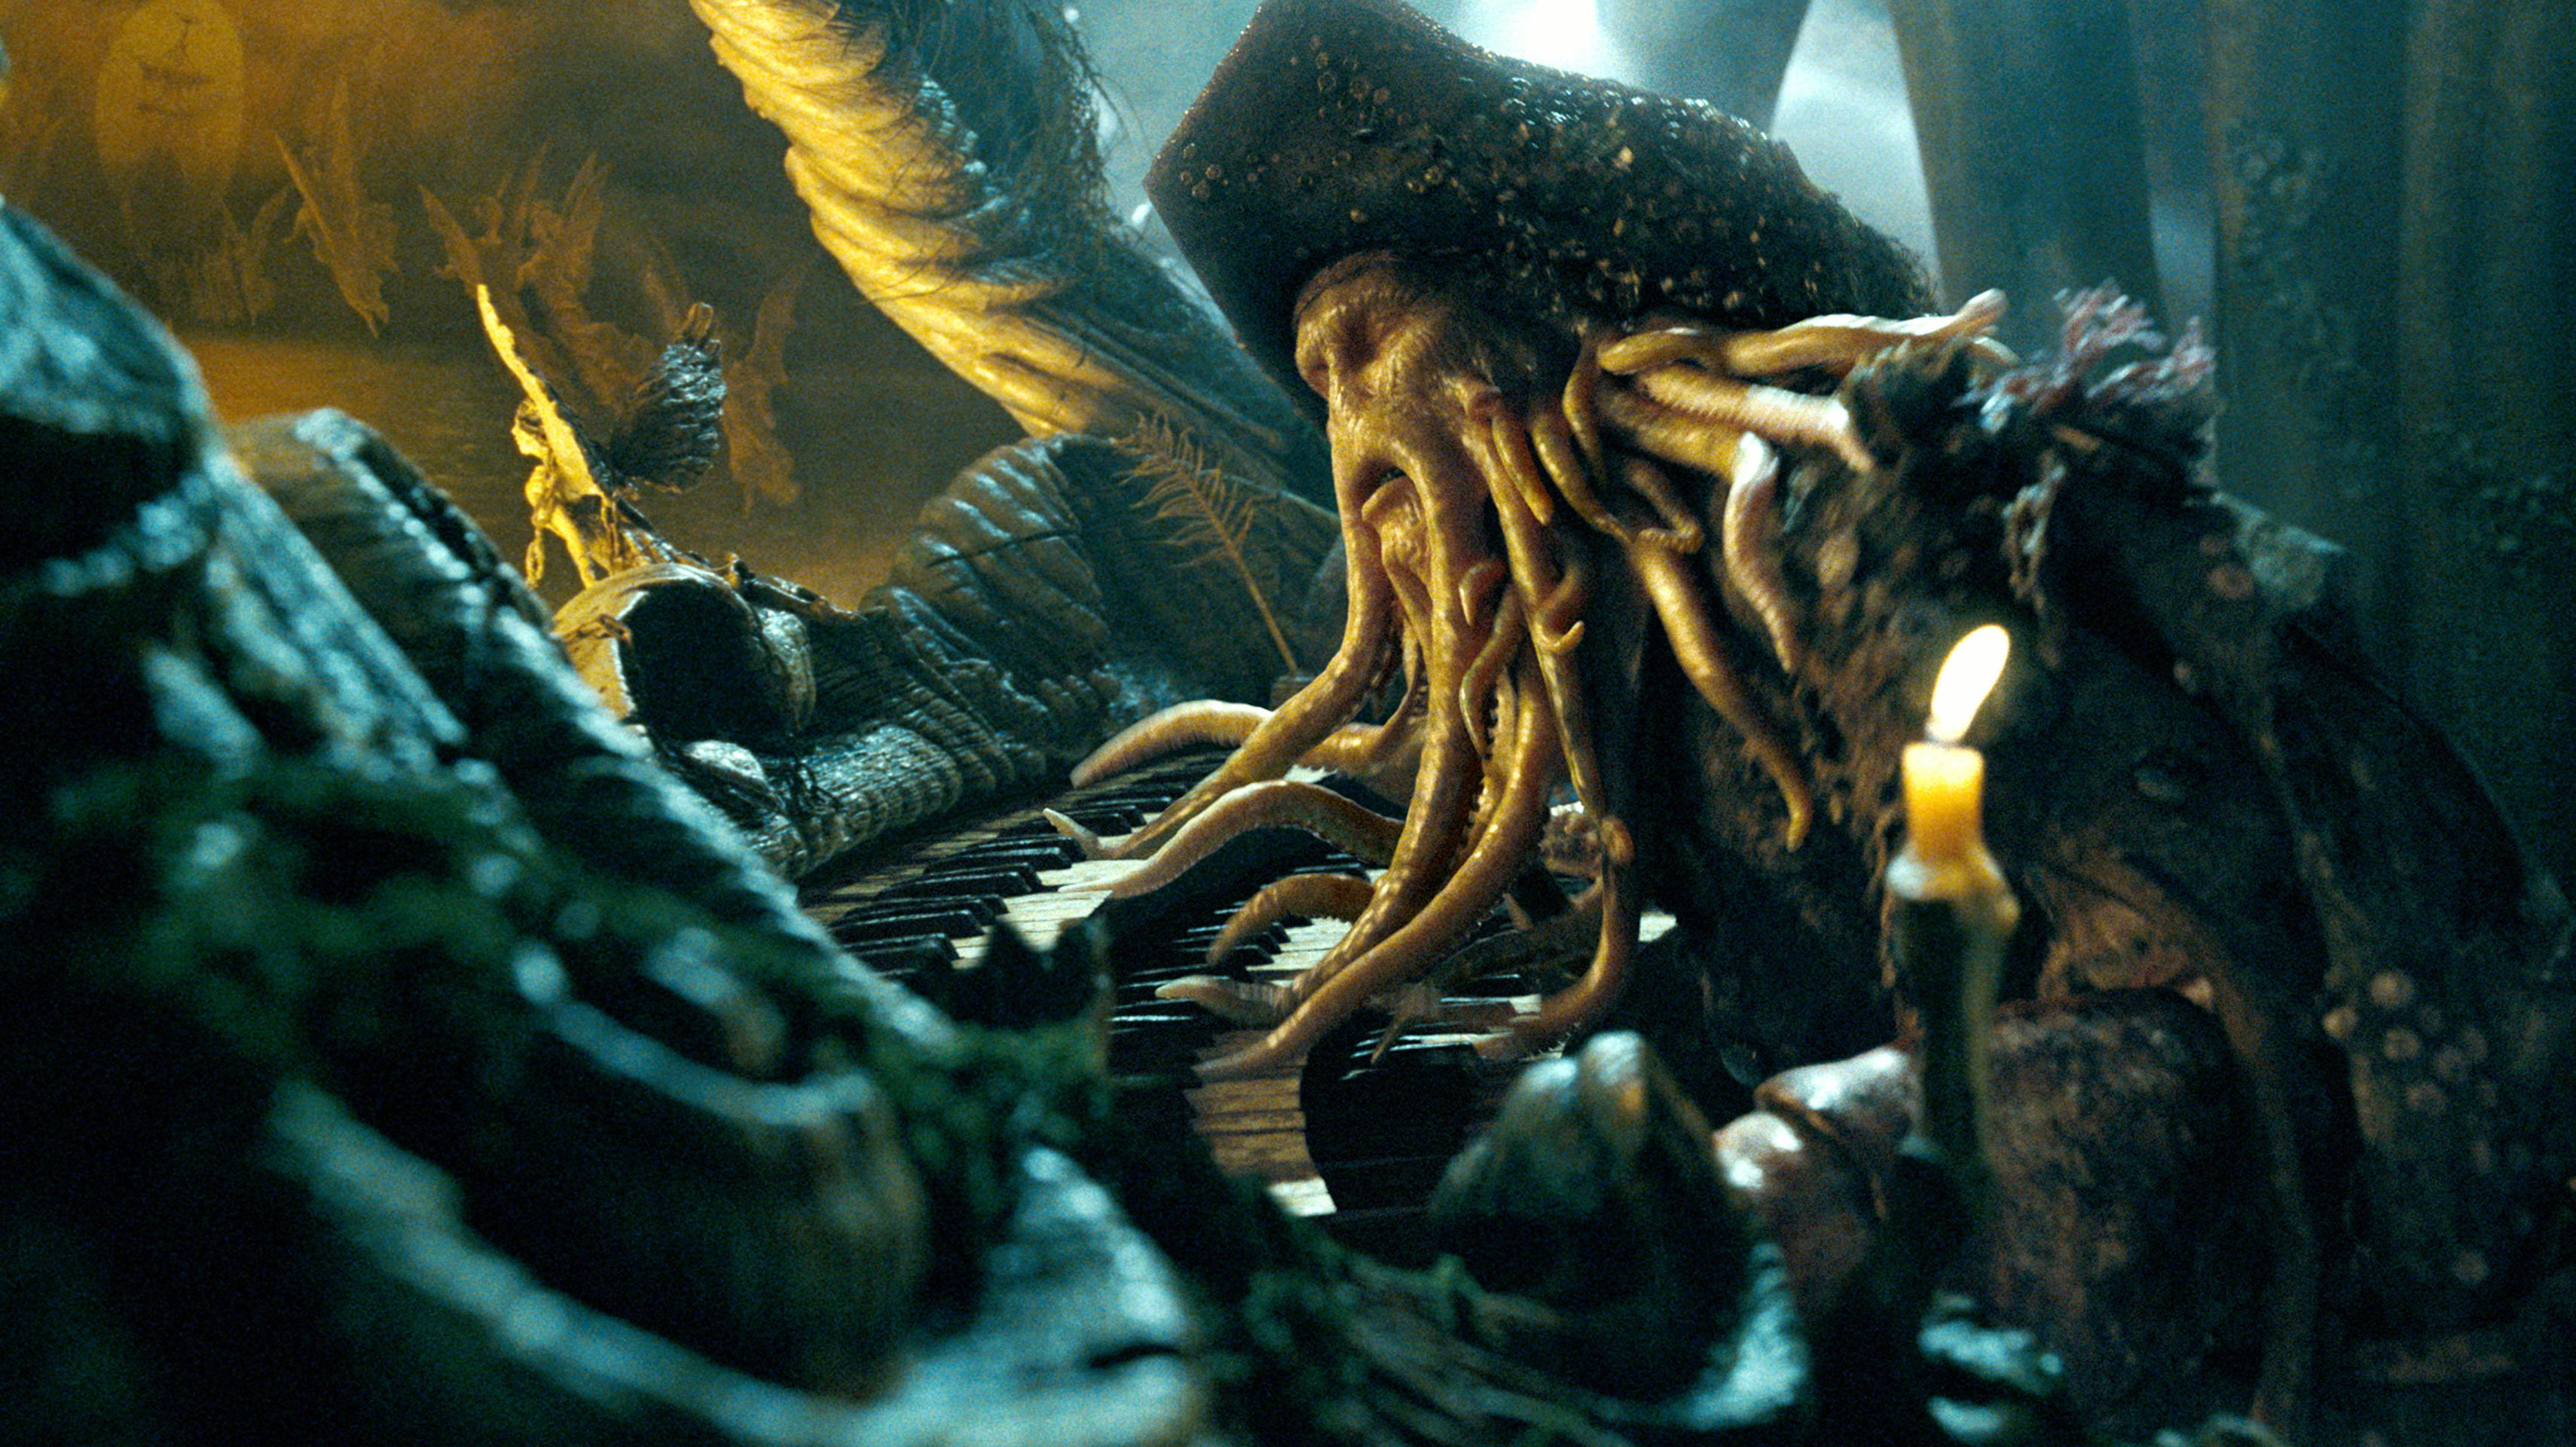 davy jones, movie, pirates of the caribbean: dead man's chest, pirates of the caribbean lock screen backgrounds